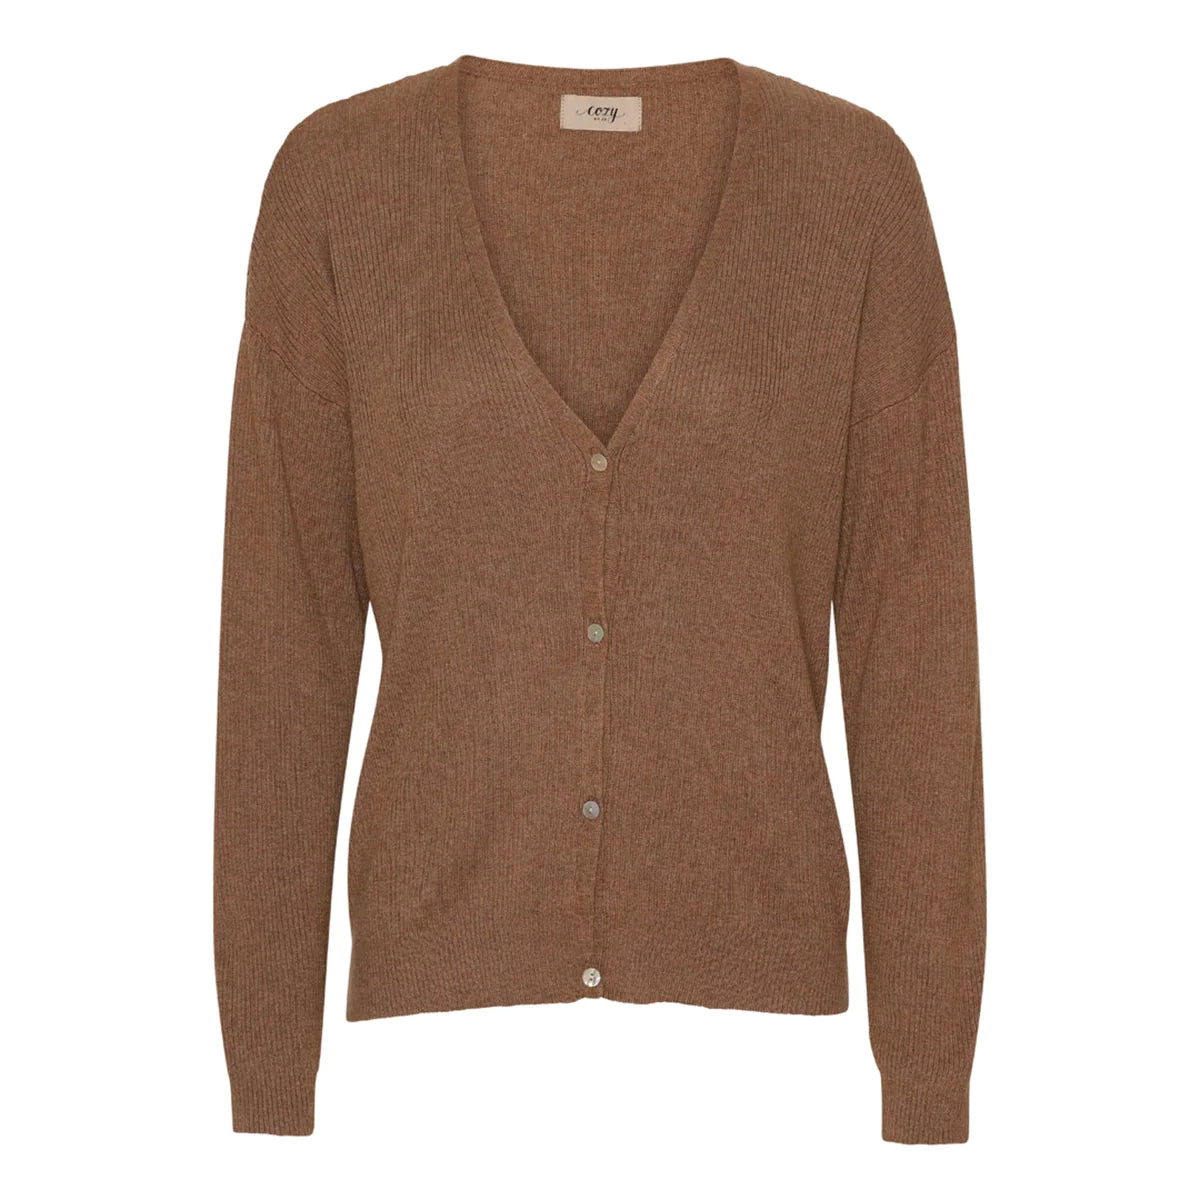 Cozy YES PLEASE cardigan - Cashmere blend